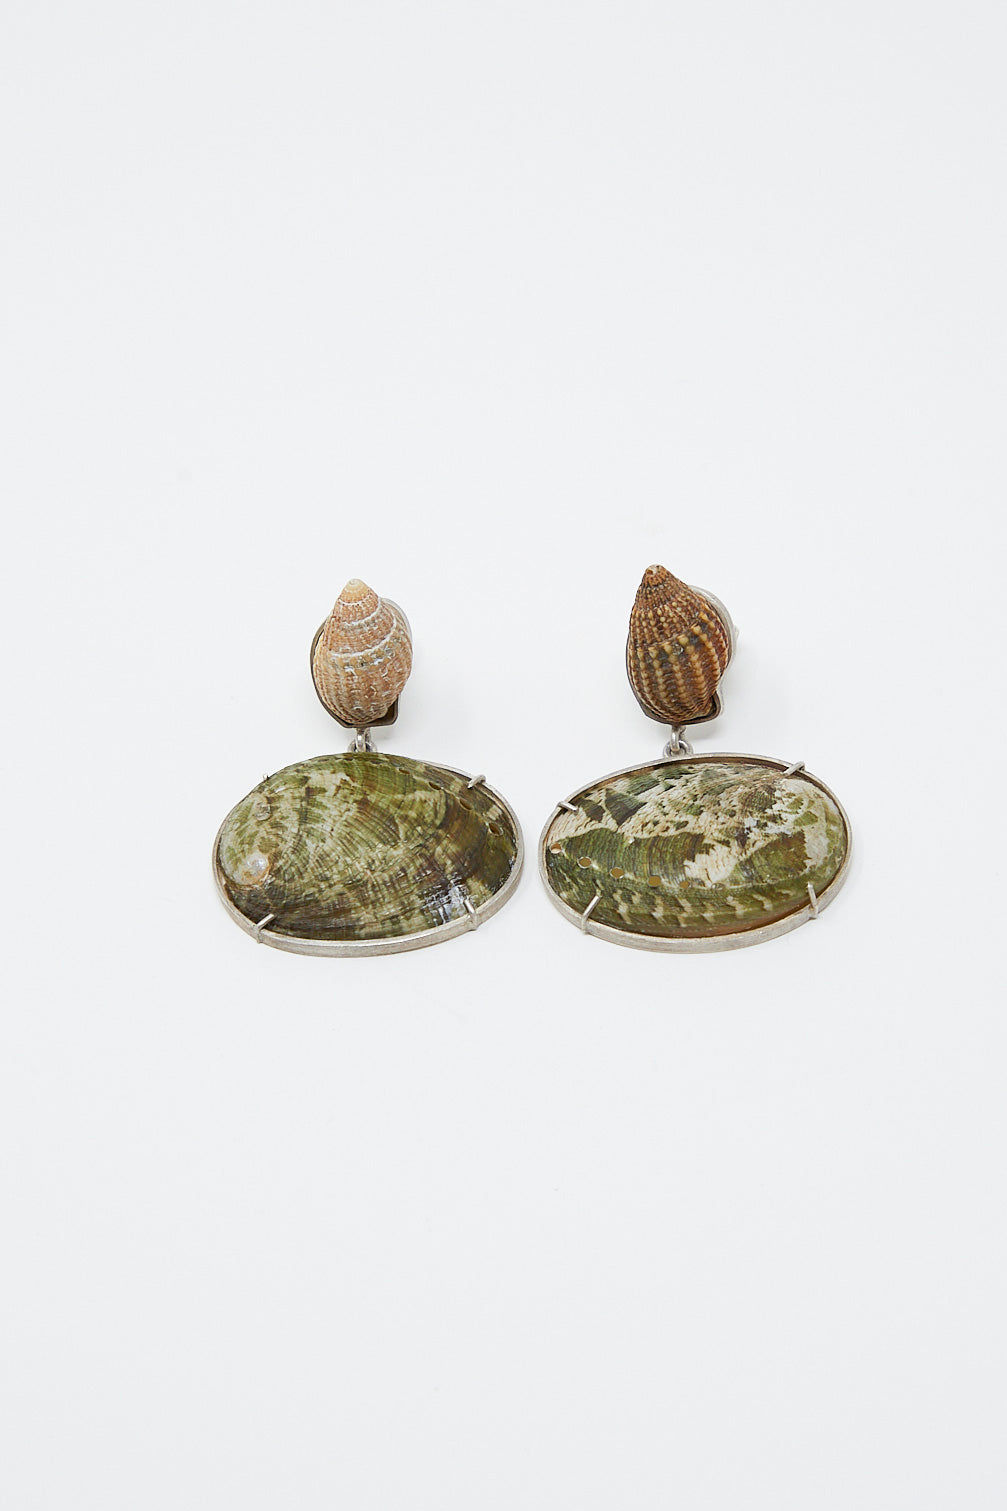 A pair of unique La Mar sterling silver shell earrings in green and brown, made with sterling silver, on a white surface.